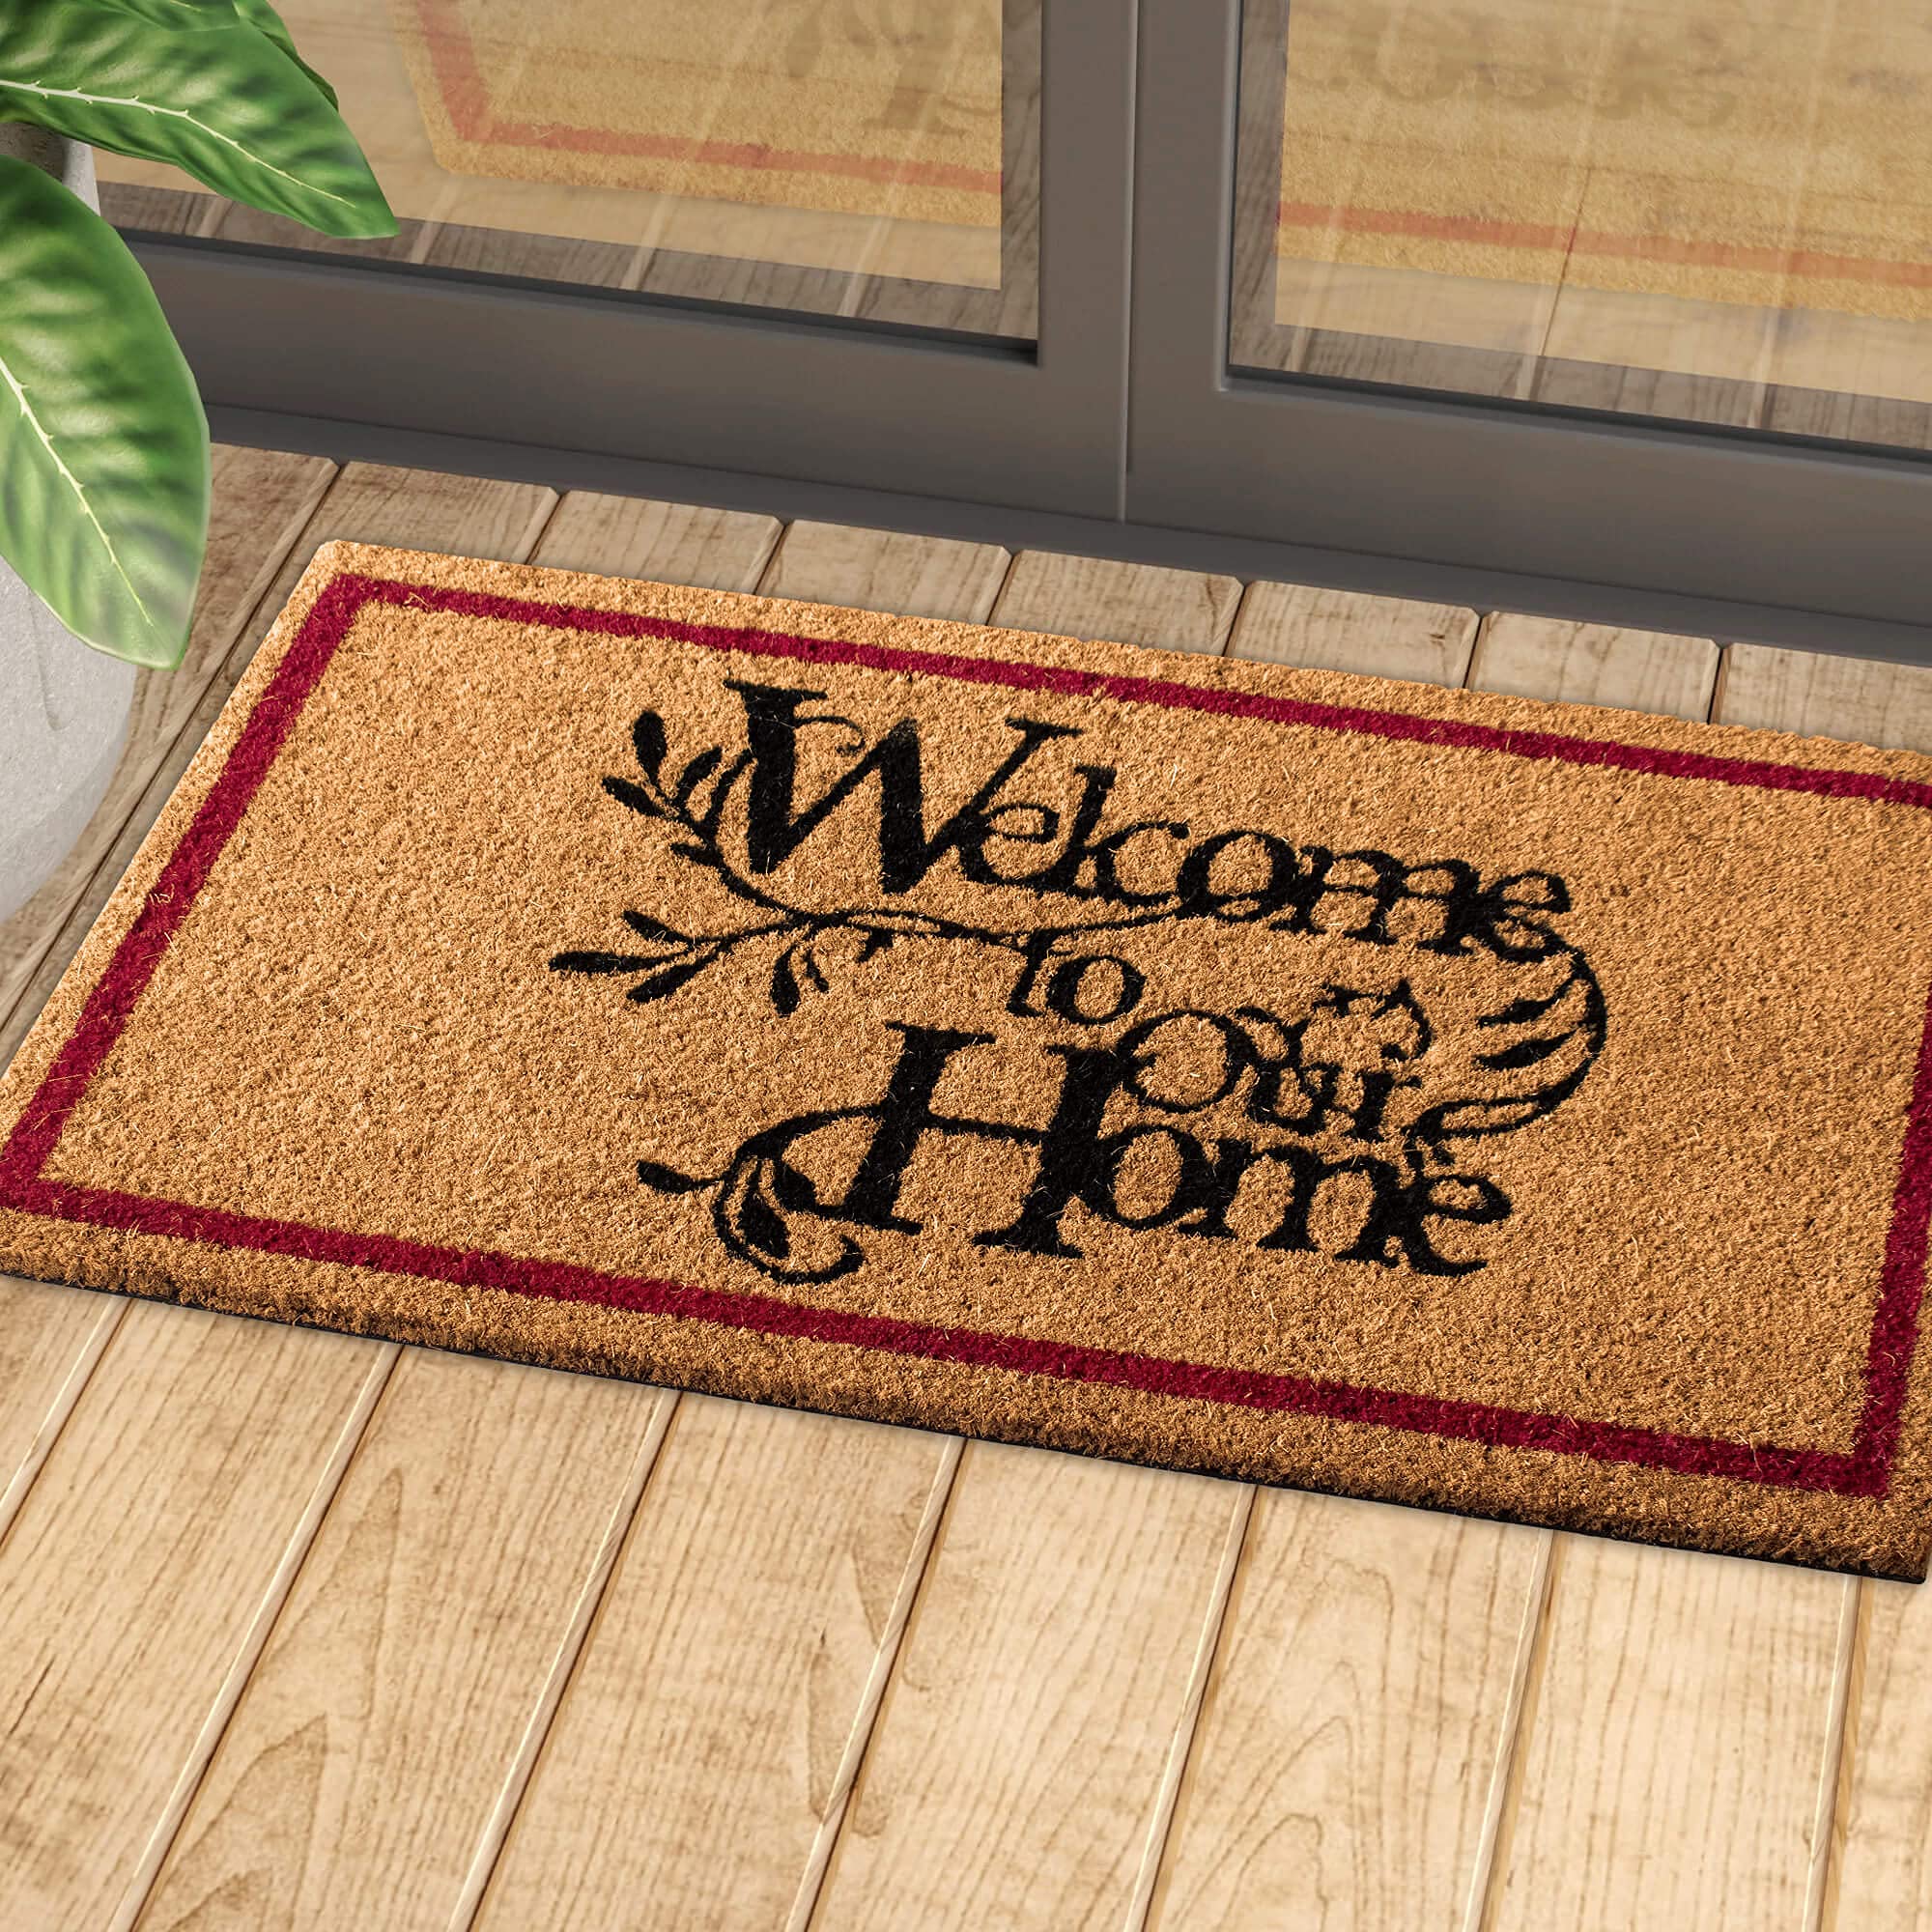 LuxUrux Welcome Mats Outdoor Coco Coir Doormat, with Heavy-Duty PVC Backing - Natural - Perfect Color/Sizing for Outdoor uses.  - Like New